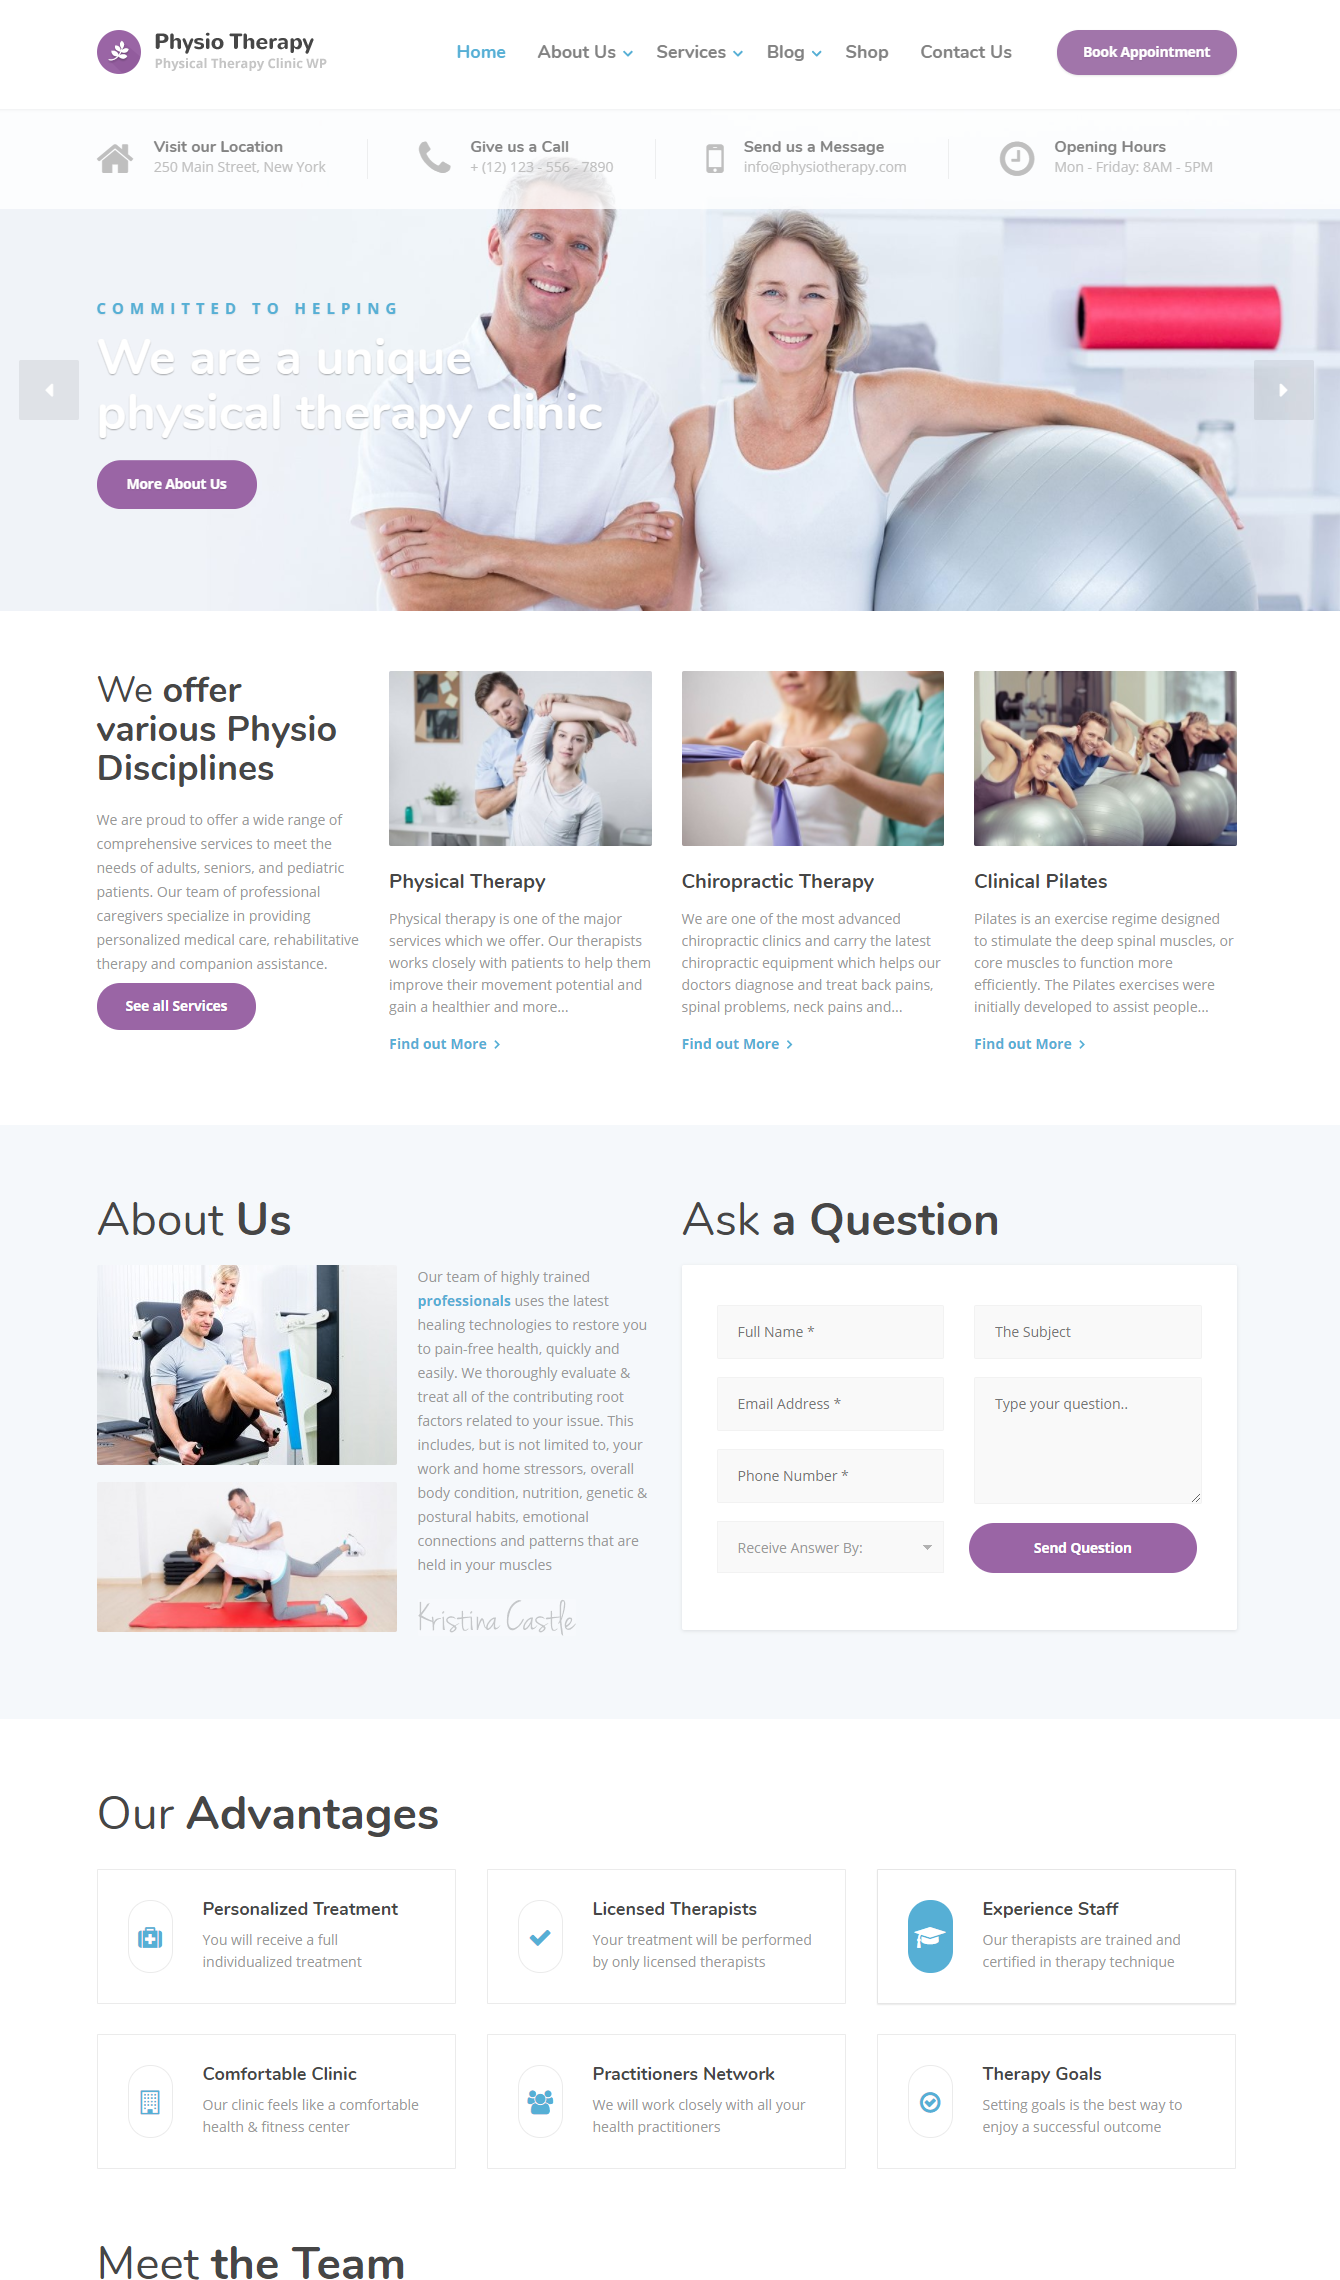 MẪU WEBSITE Y TẾ- PHYSIO THERAPY